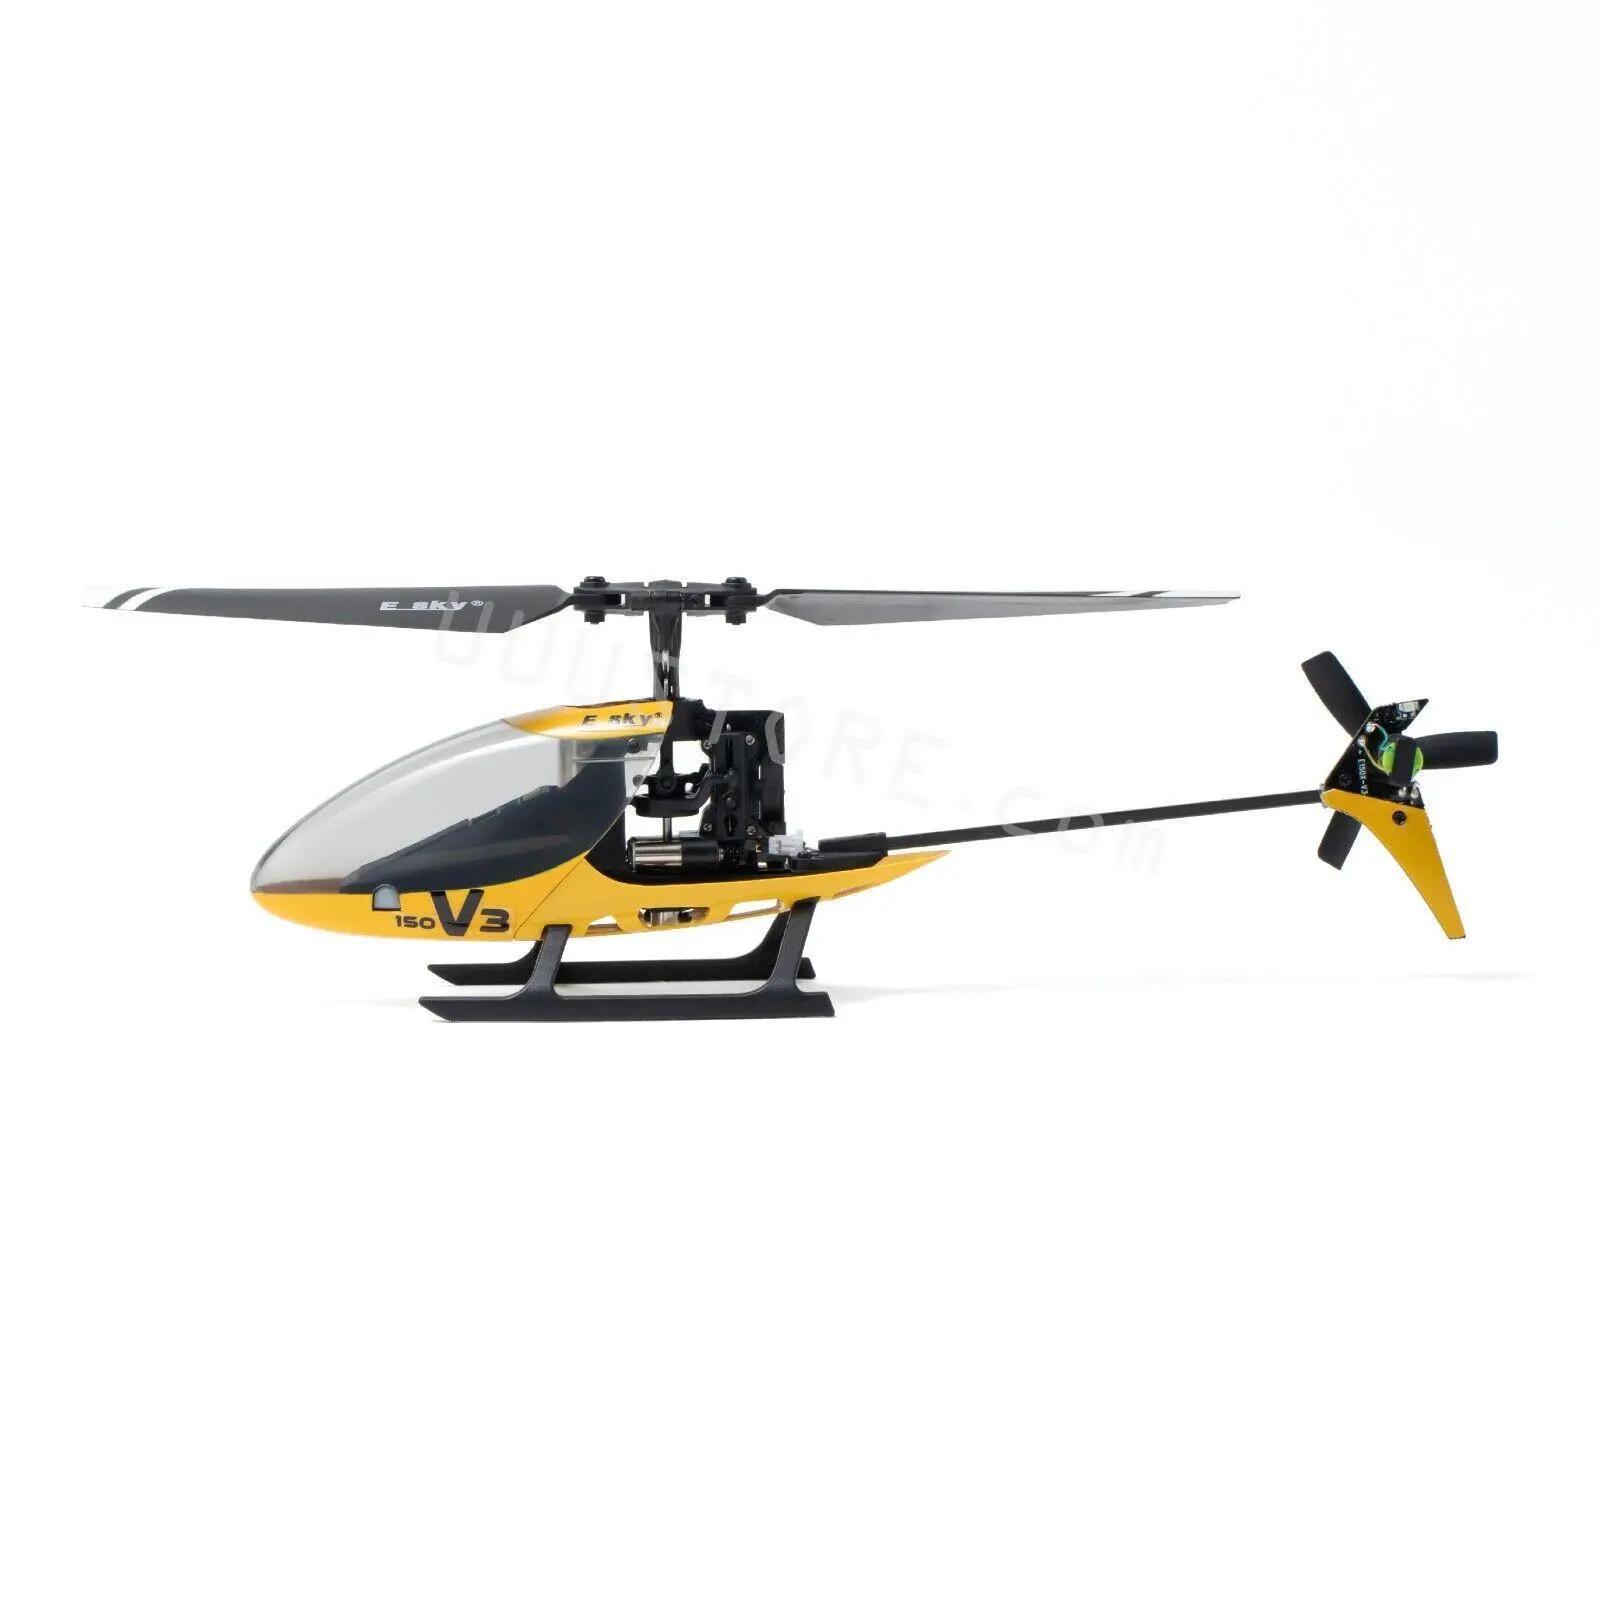 Esky 150 V2 Helicopter: Long-lasting and customizable: Exploring the features and maintenance of the Esky 150 V2 helicopter